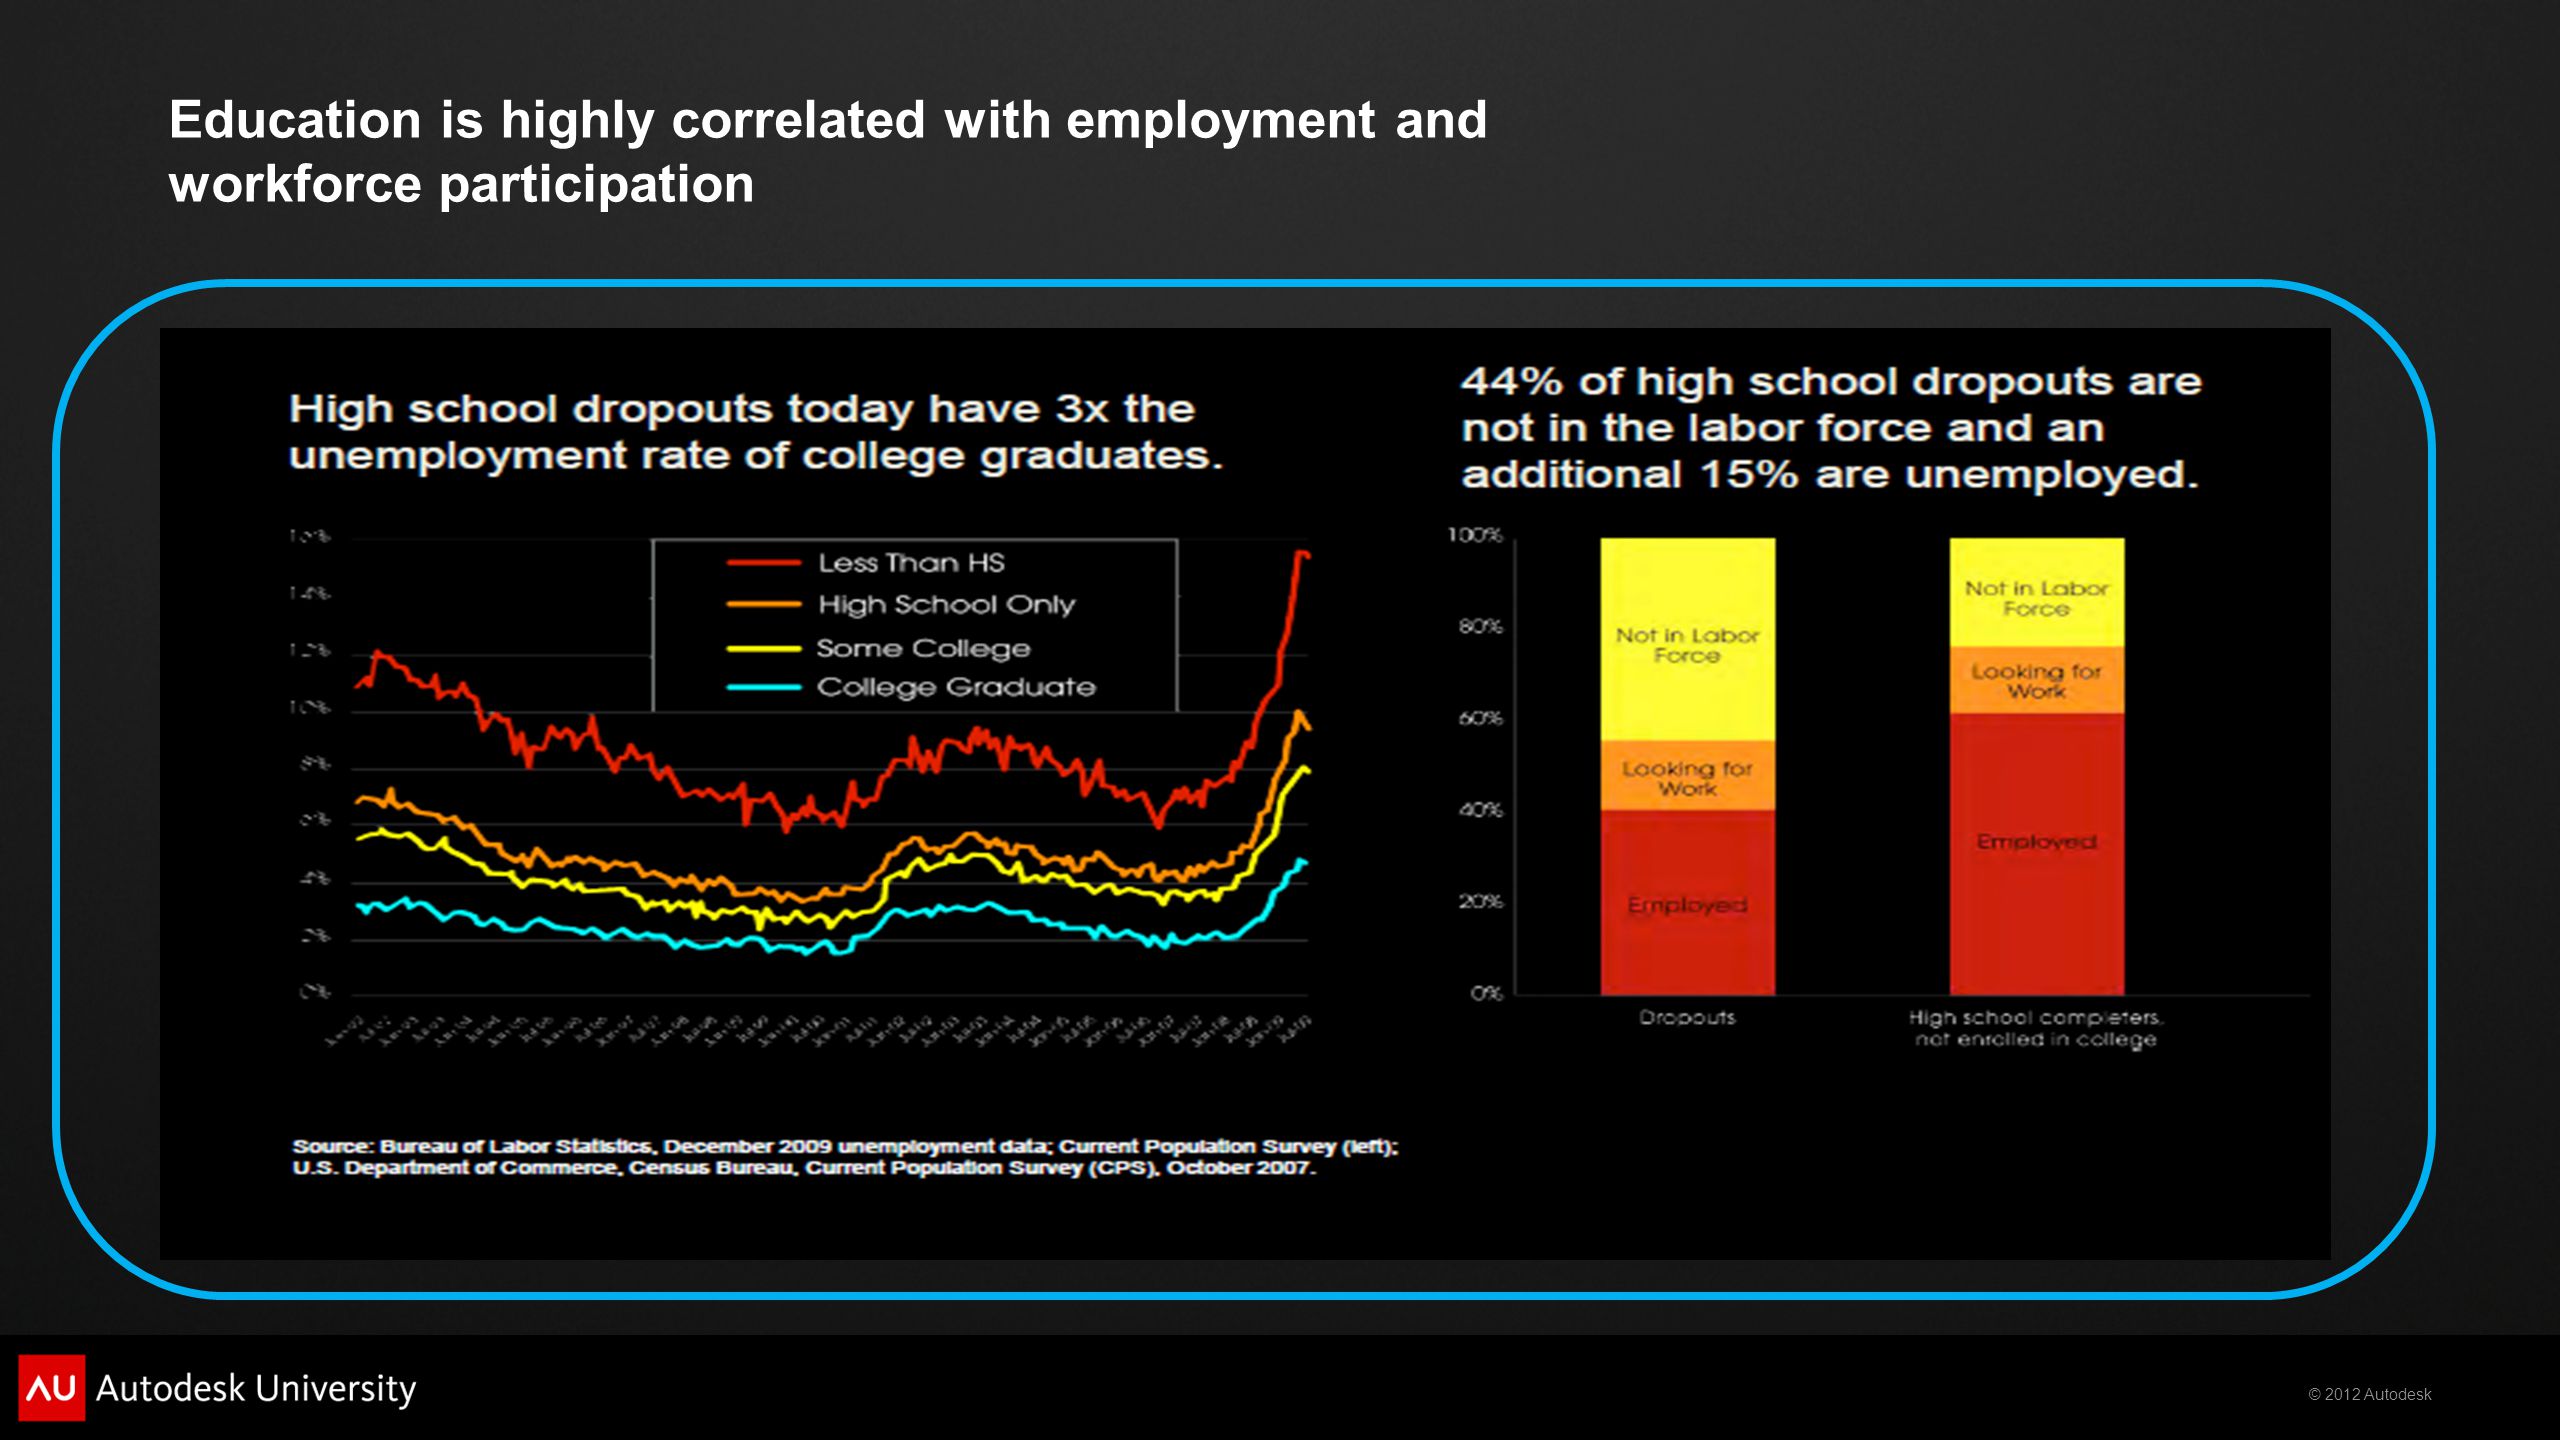 © 2012 Autodesk Education is highly correlated with employment and workforce participation